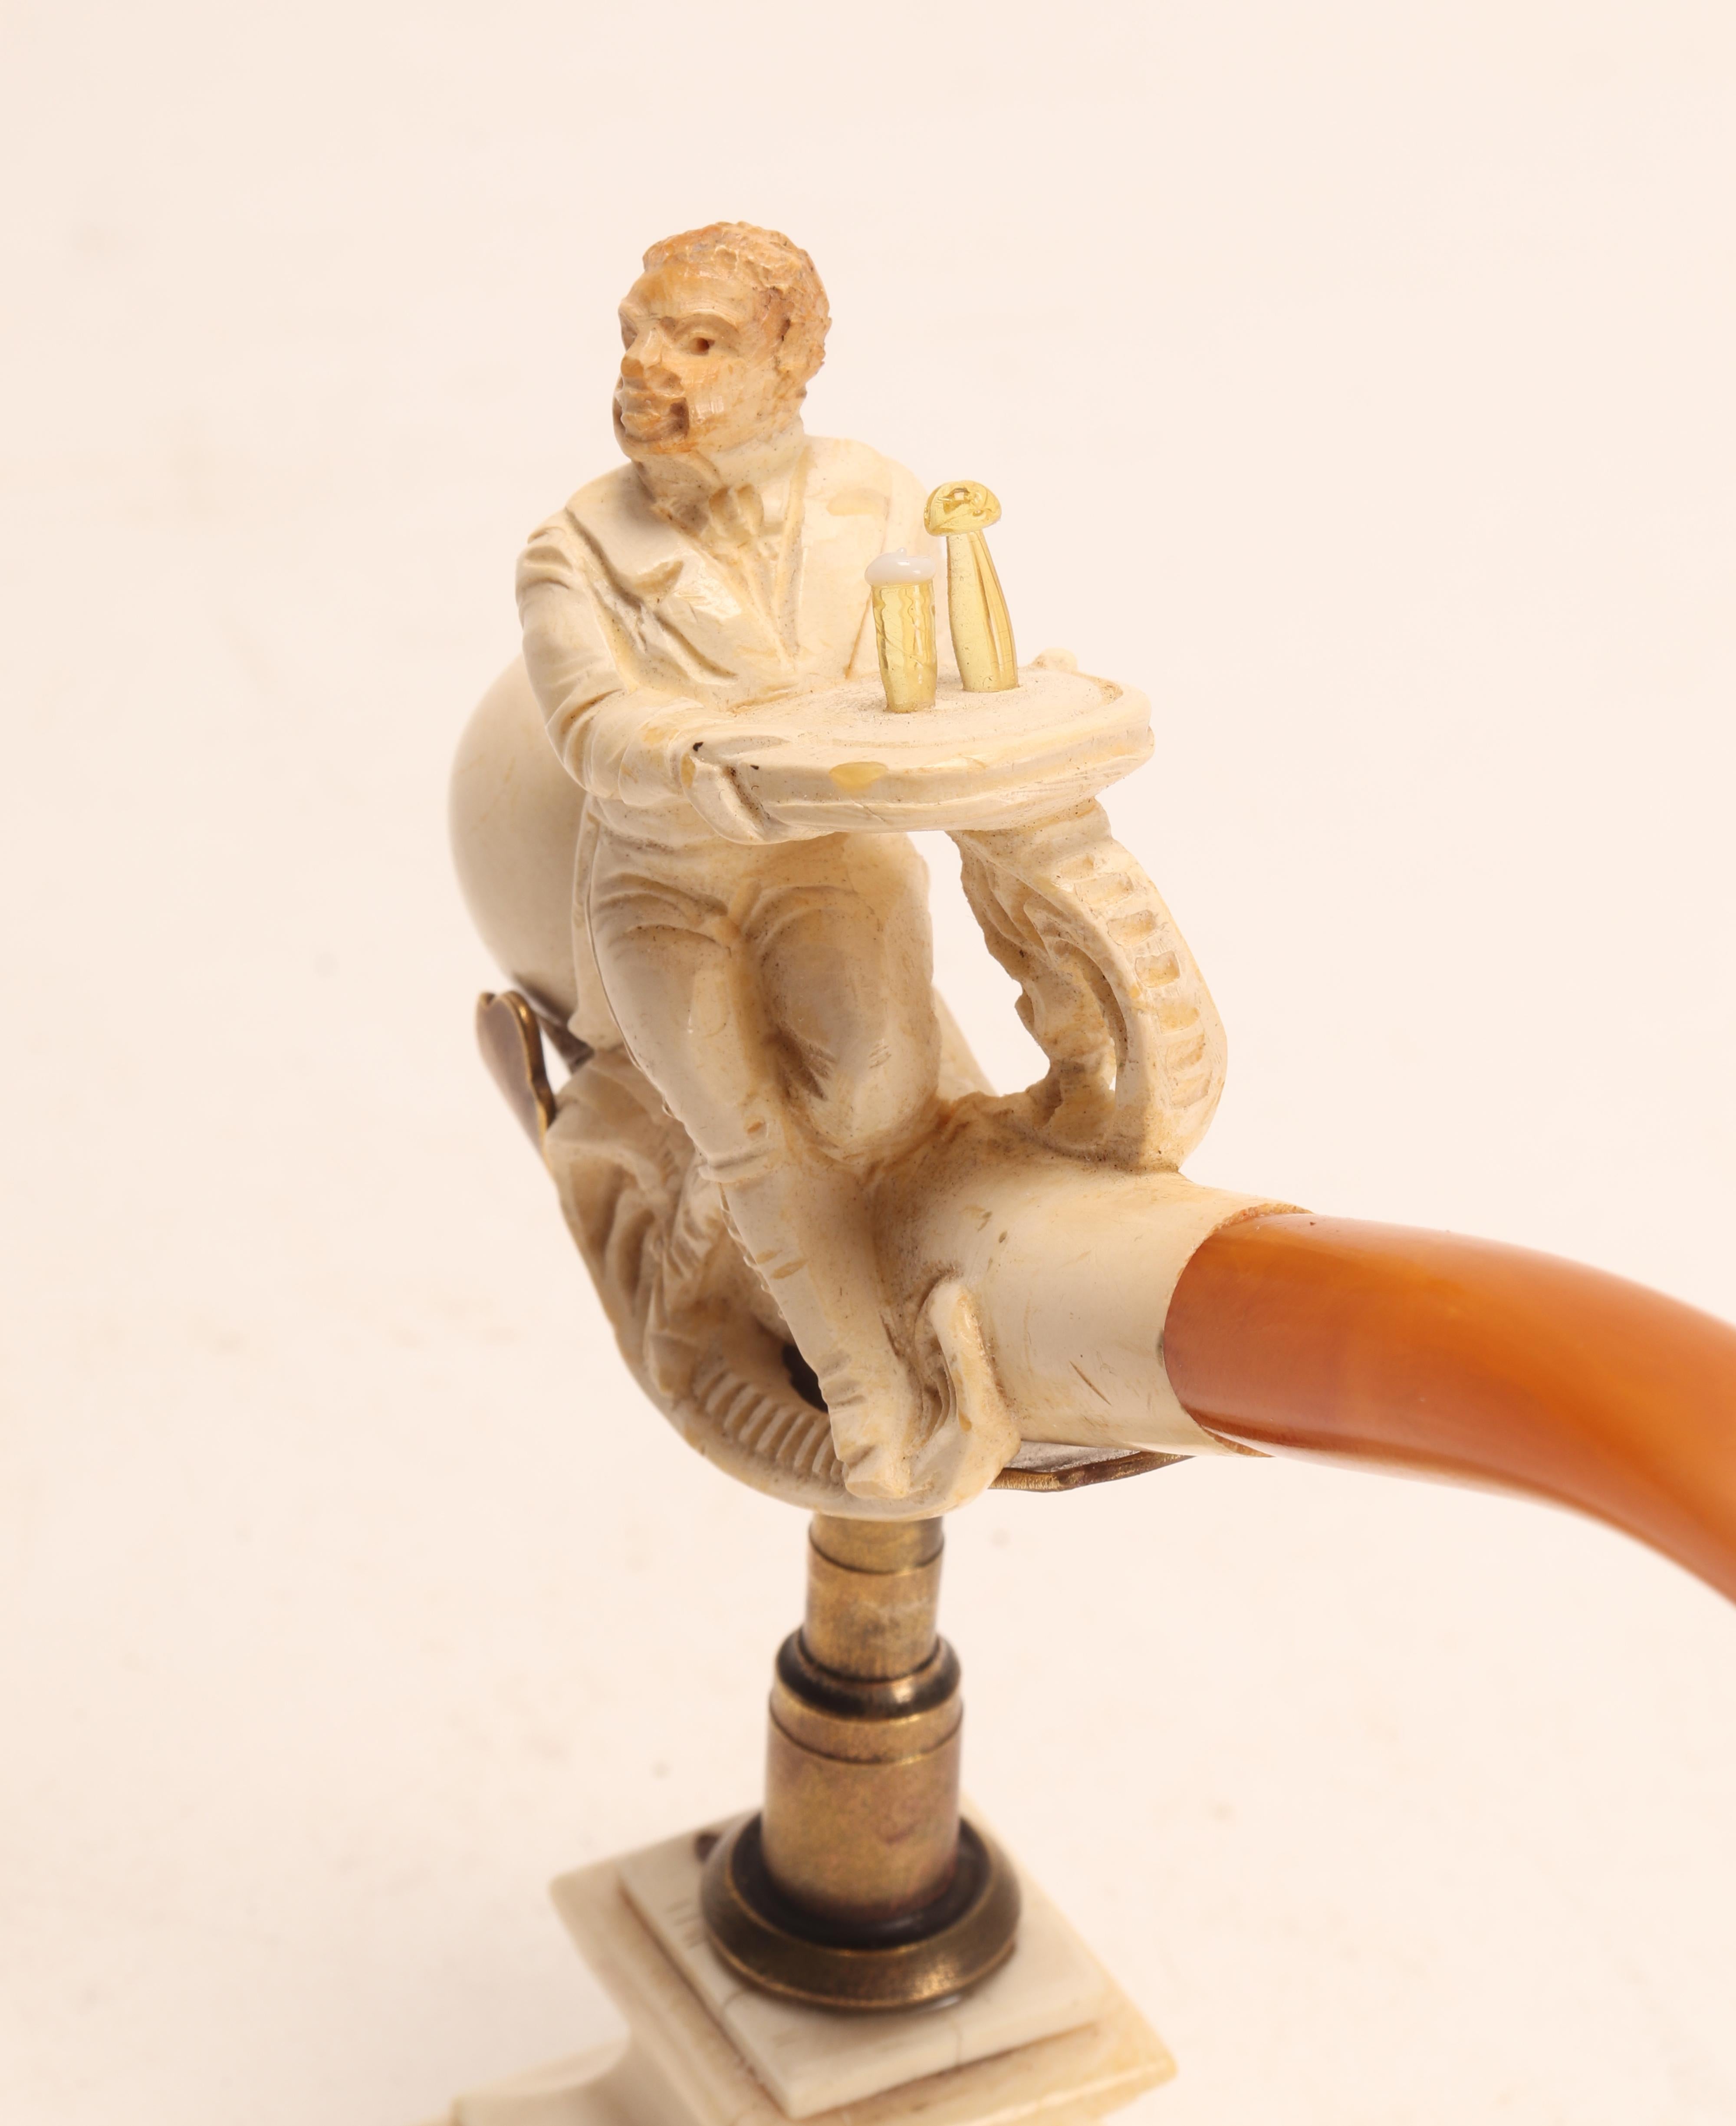 Stone Meershaum Pipe with a Waiter with the Face of a Monkey, Vienna, 1880 For Sale